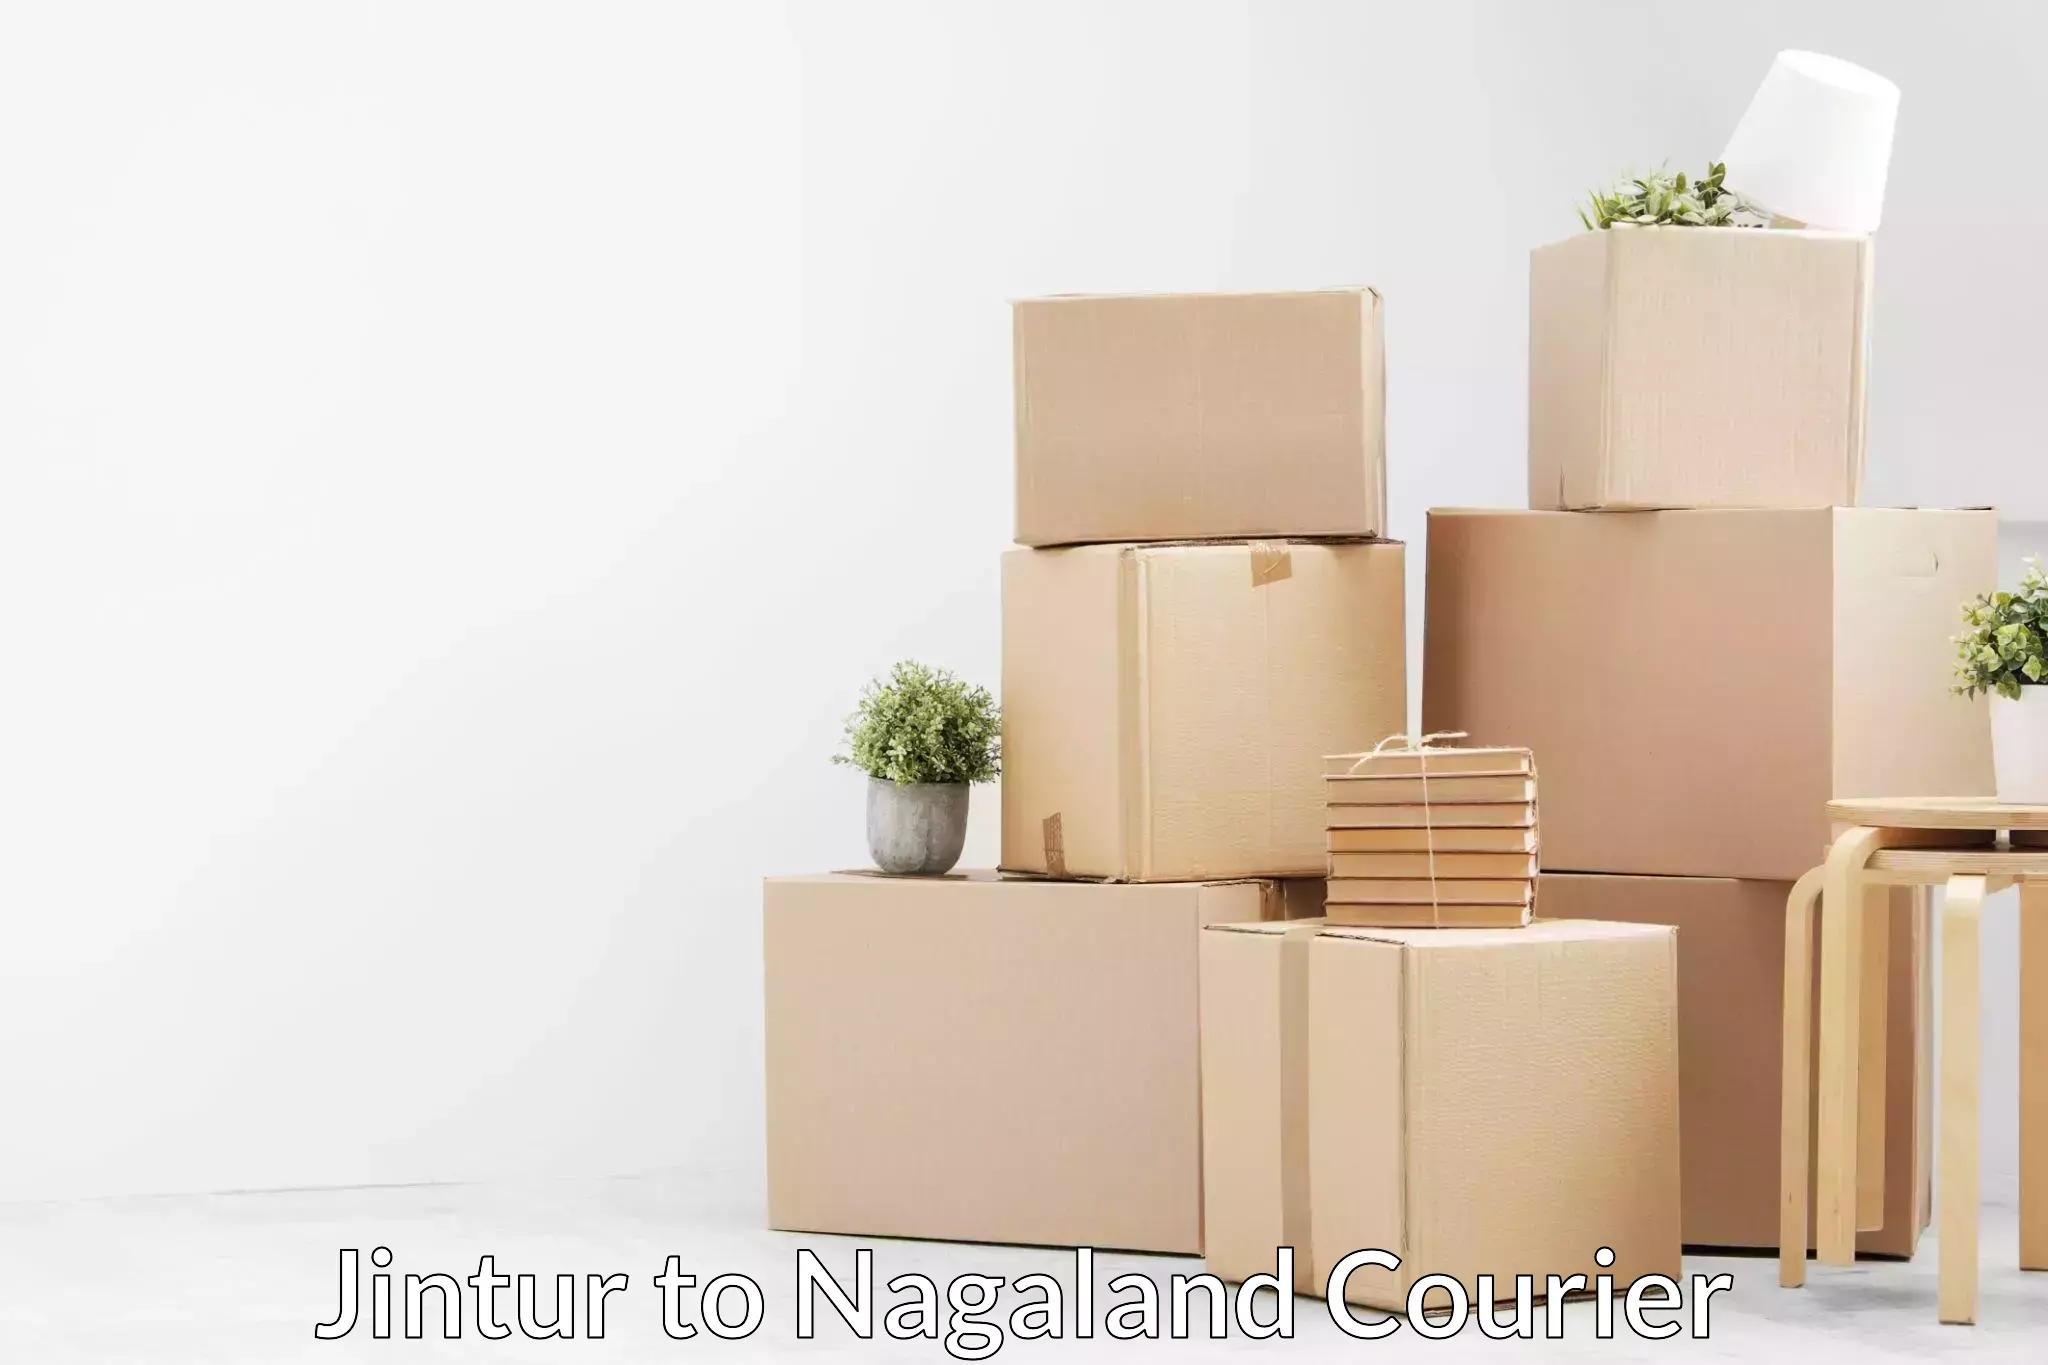 Moving and storage services Jintur to Nagaland